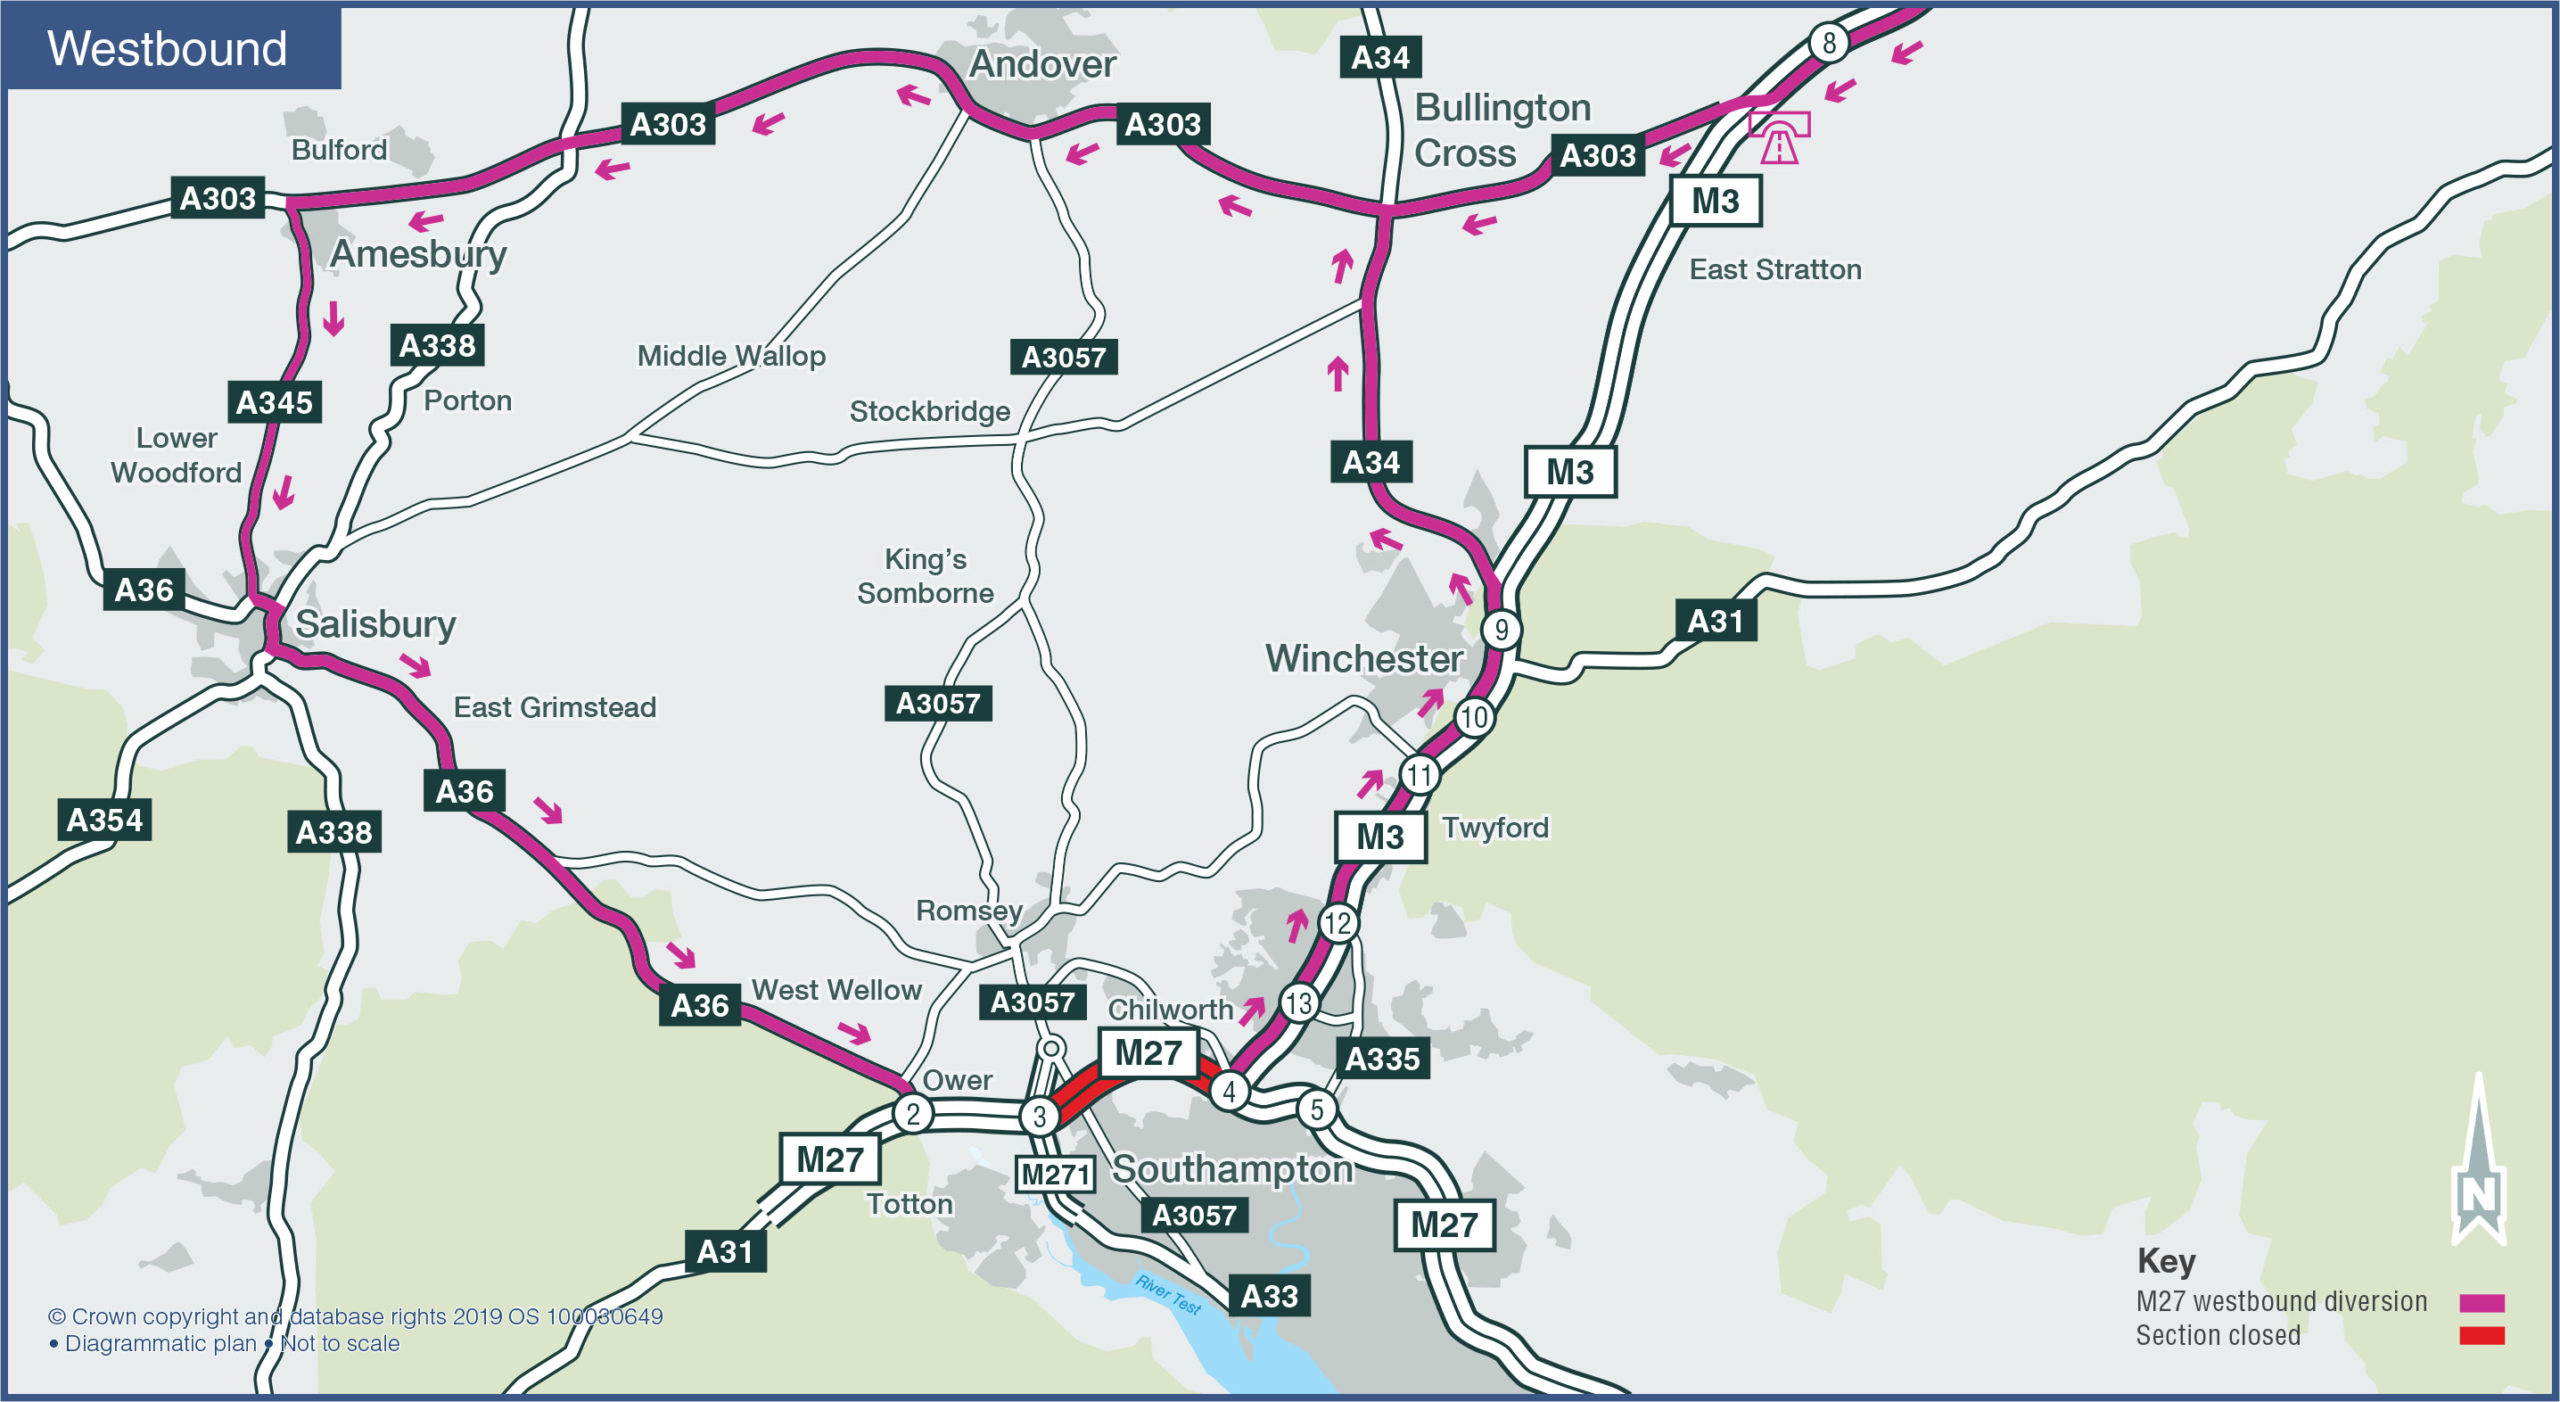 M27 Westbound diversion during January 2020 closure